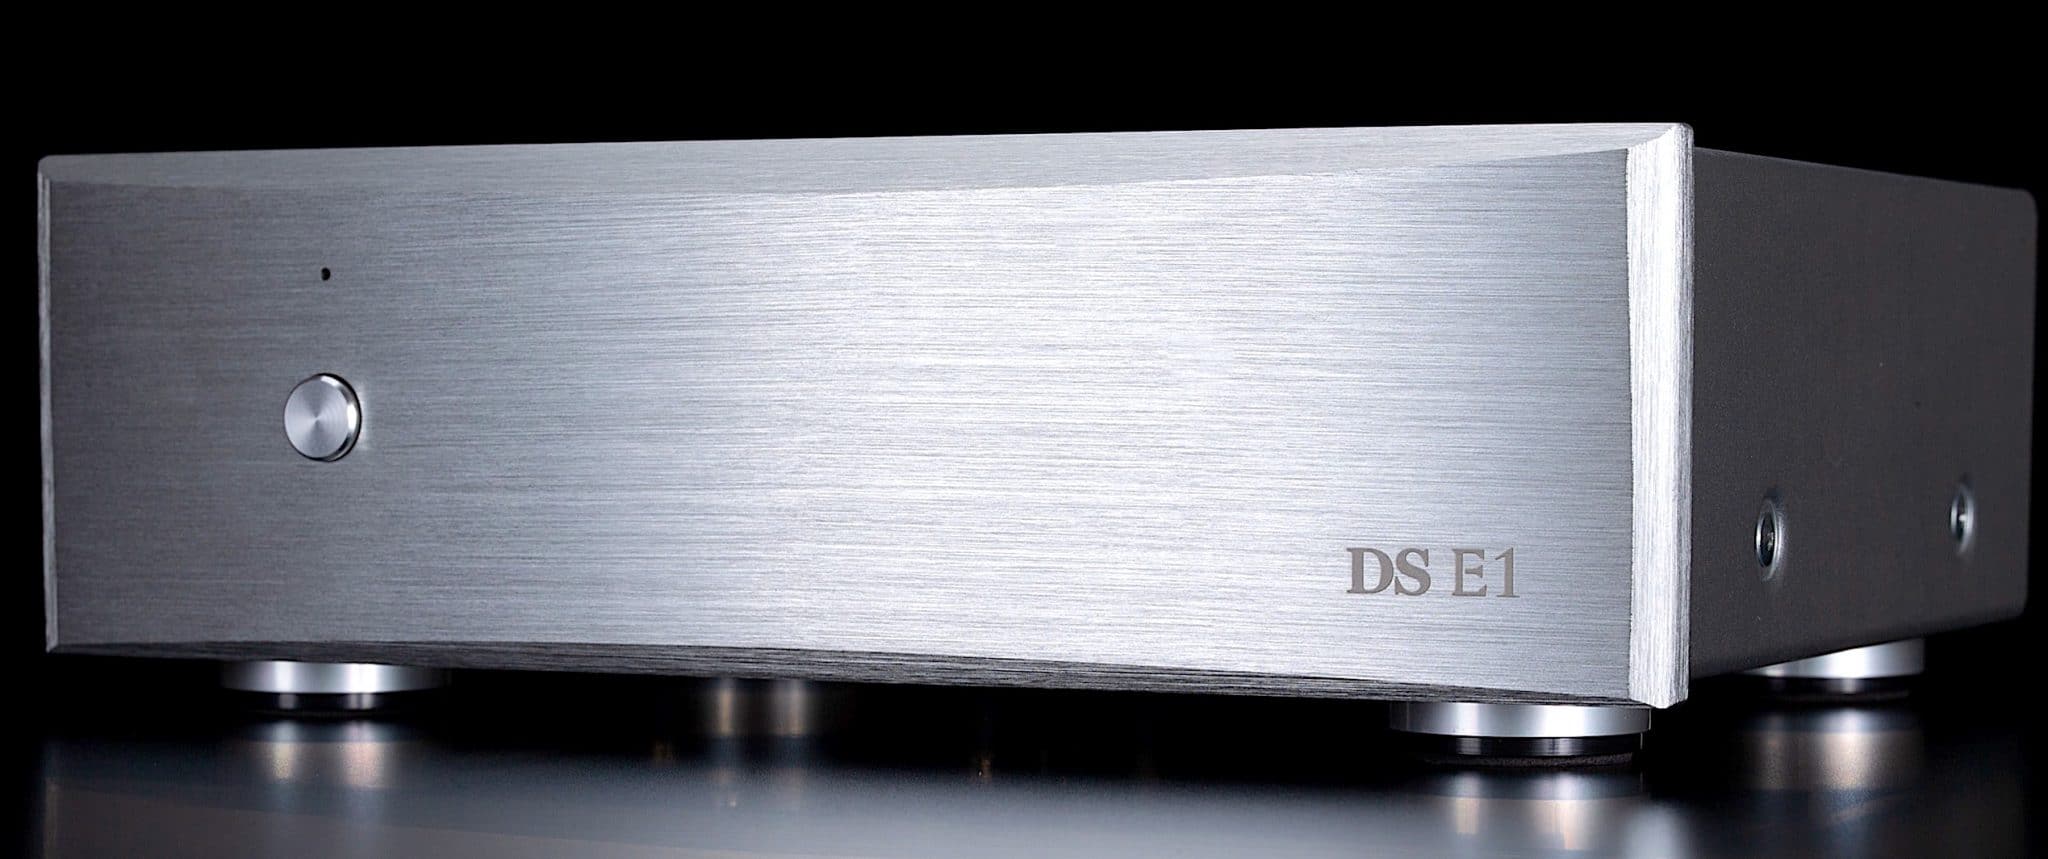 DS-E1 Entry Level From DS Audio